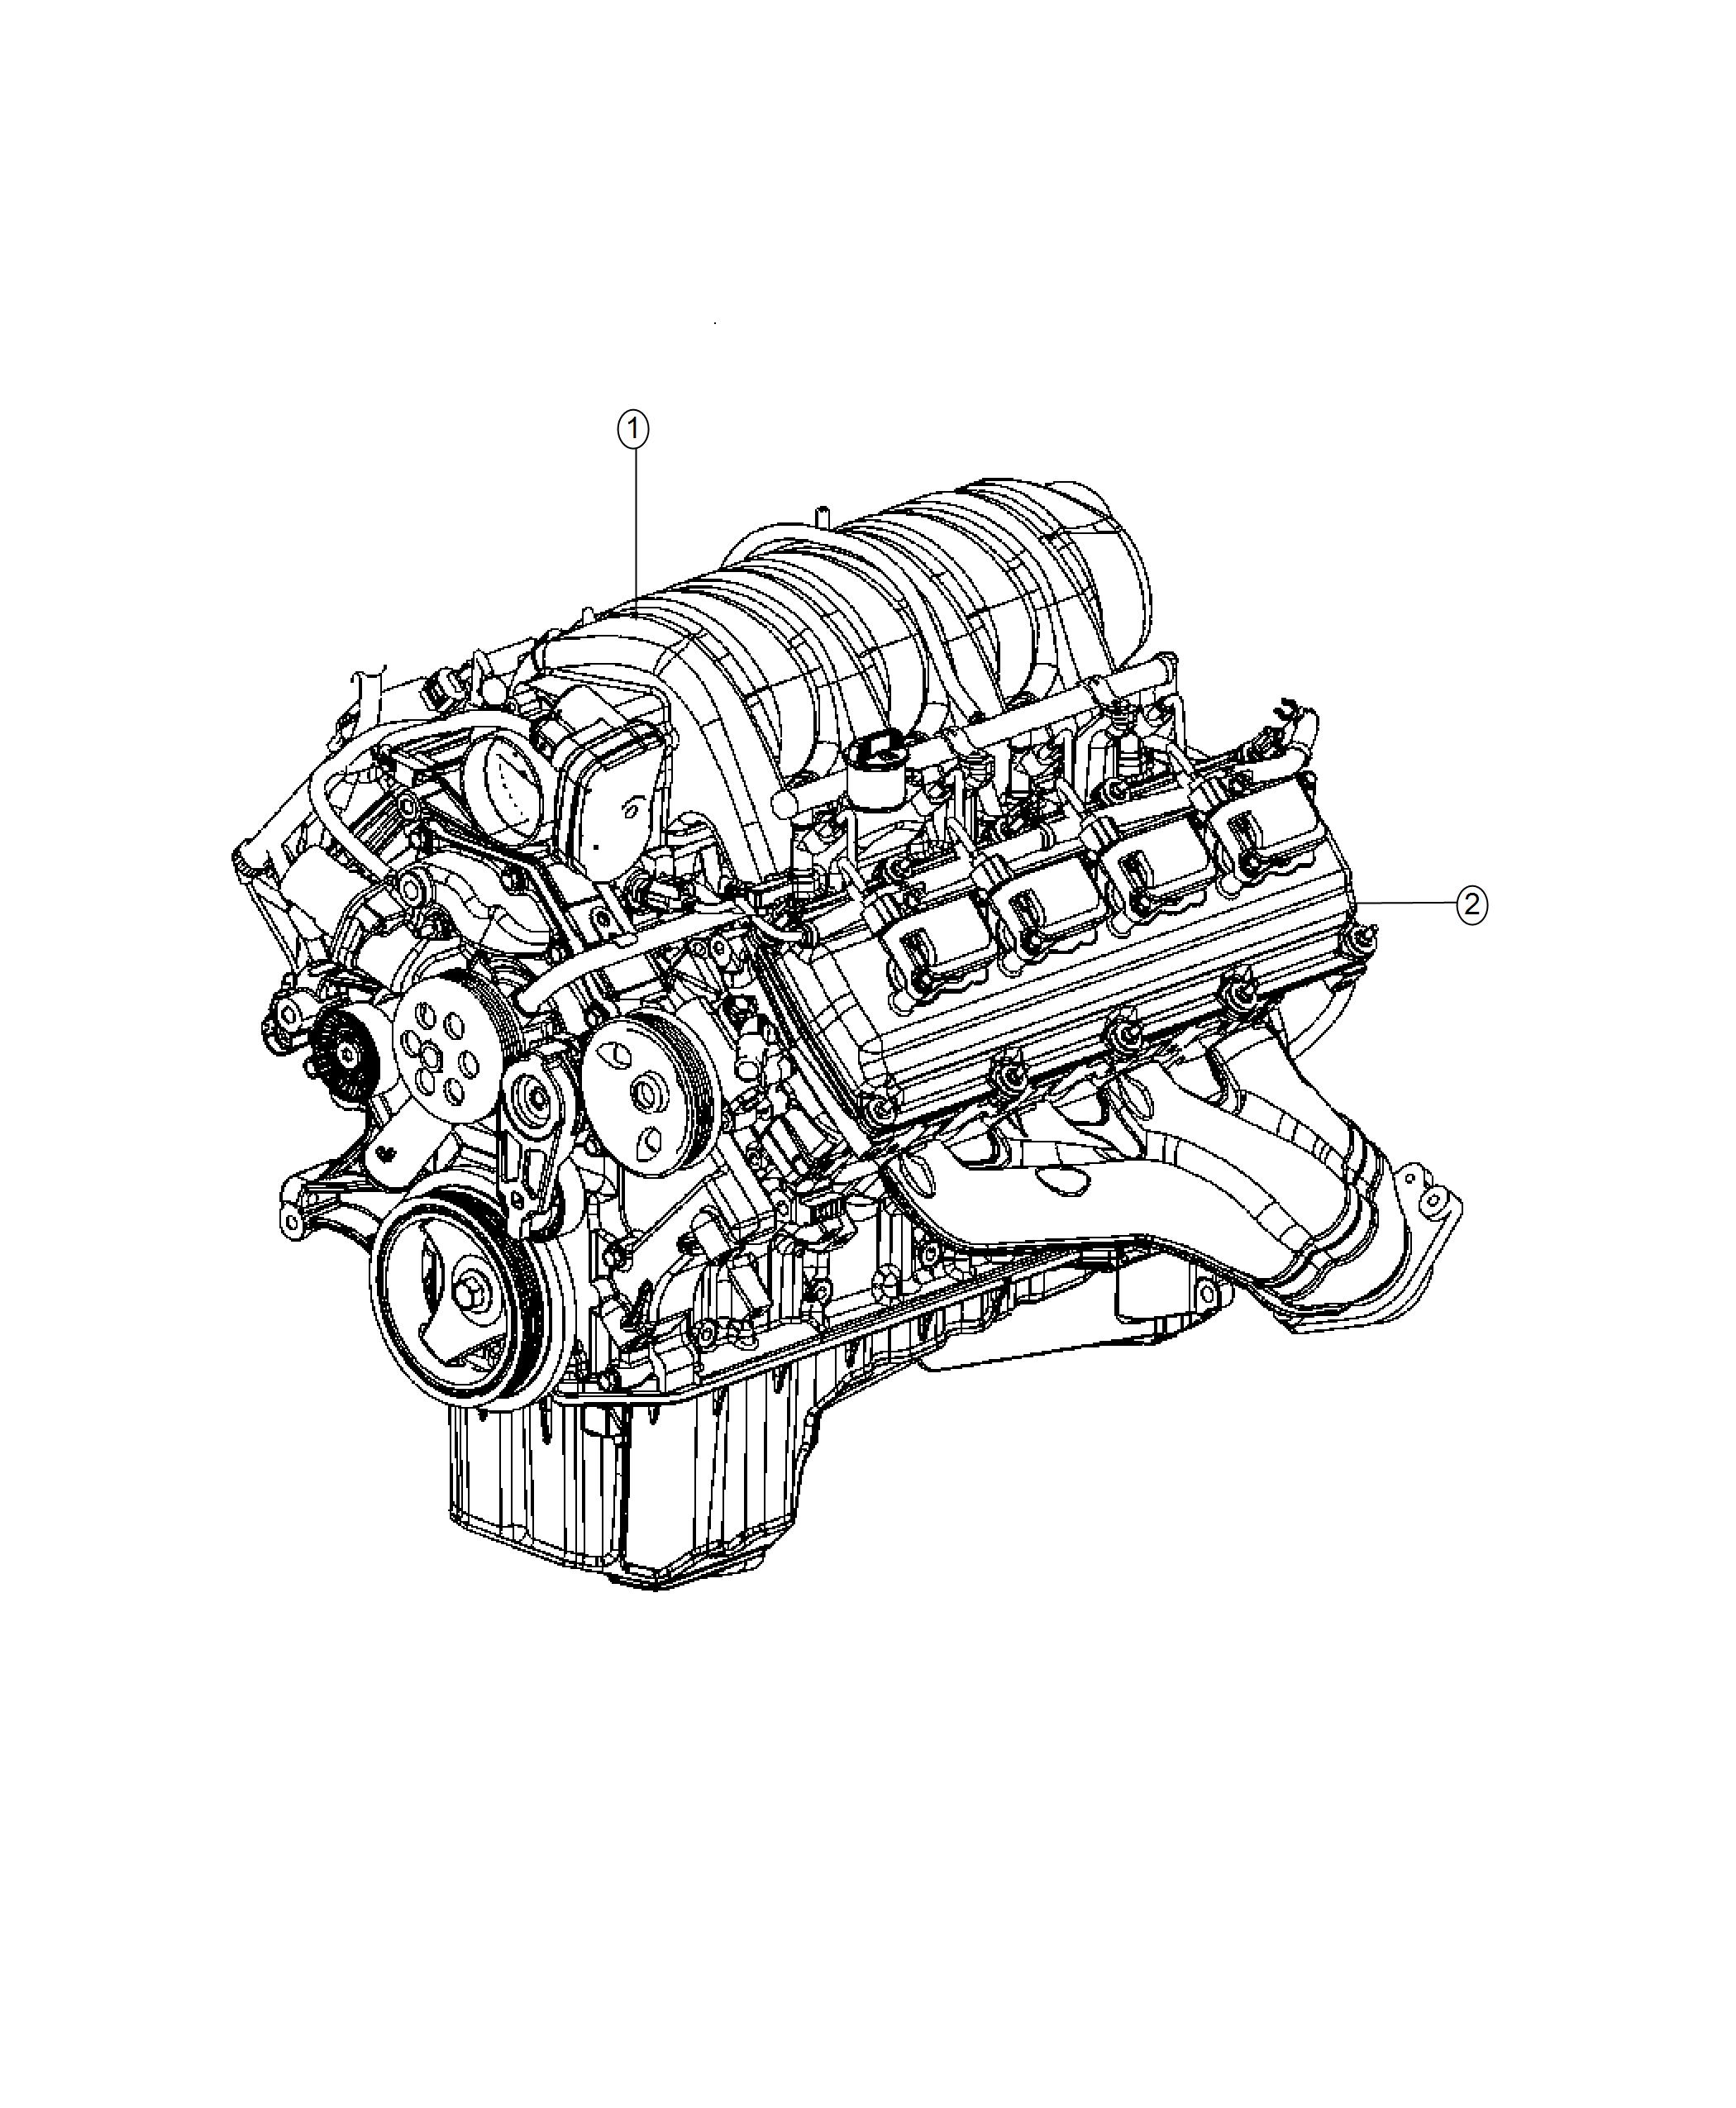 Engine Assembly And Service Engine Long Block 6.4L With MDS. Diagram